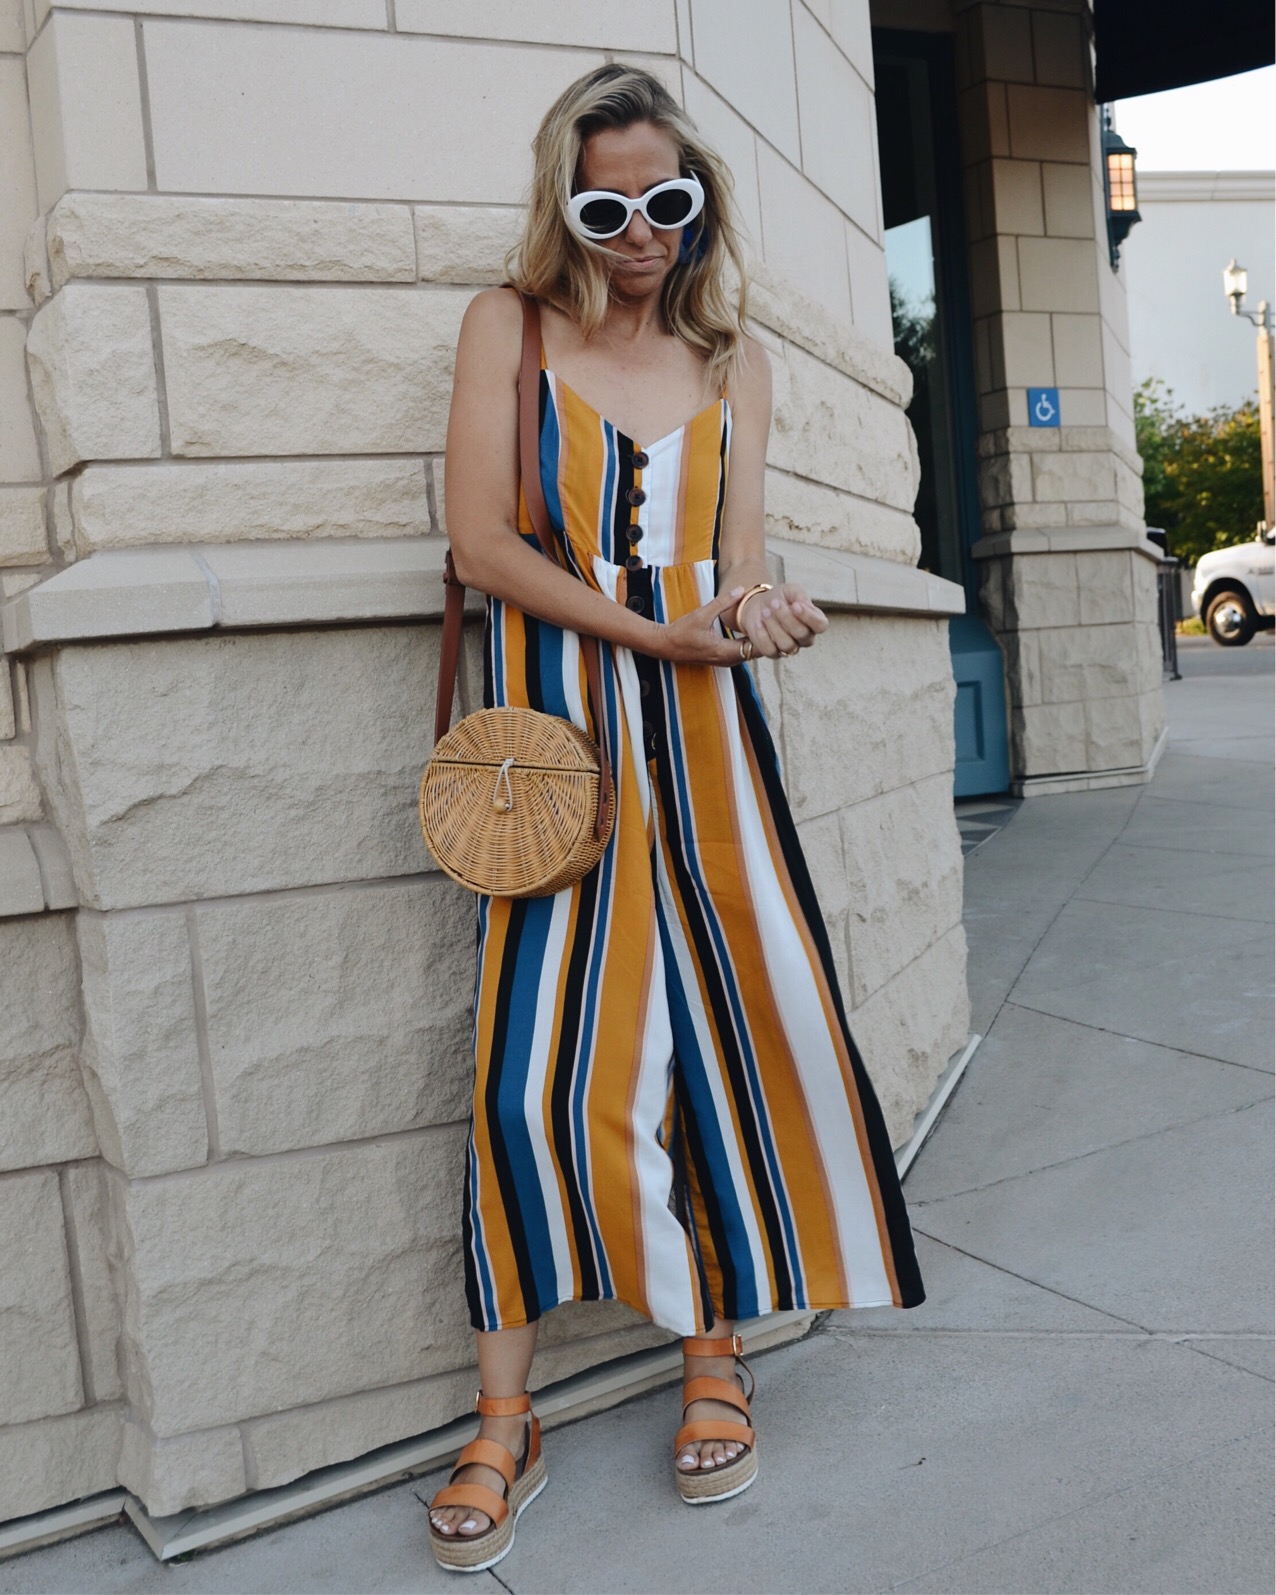 THE MUST HAVE SHOE TREND-PLATFORMS- Jaclyn De Leon Style - striped jumpsuit + woven handbag + espadrille sandals + retro style sunglasses + what to wear this summer + casual street style + DSW